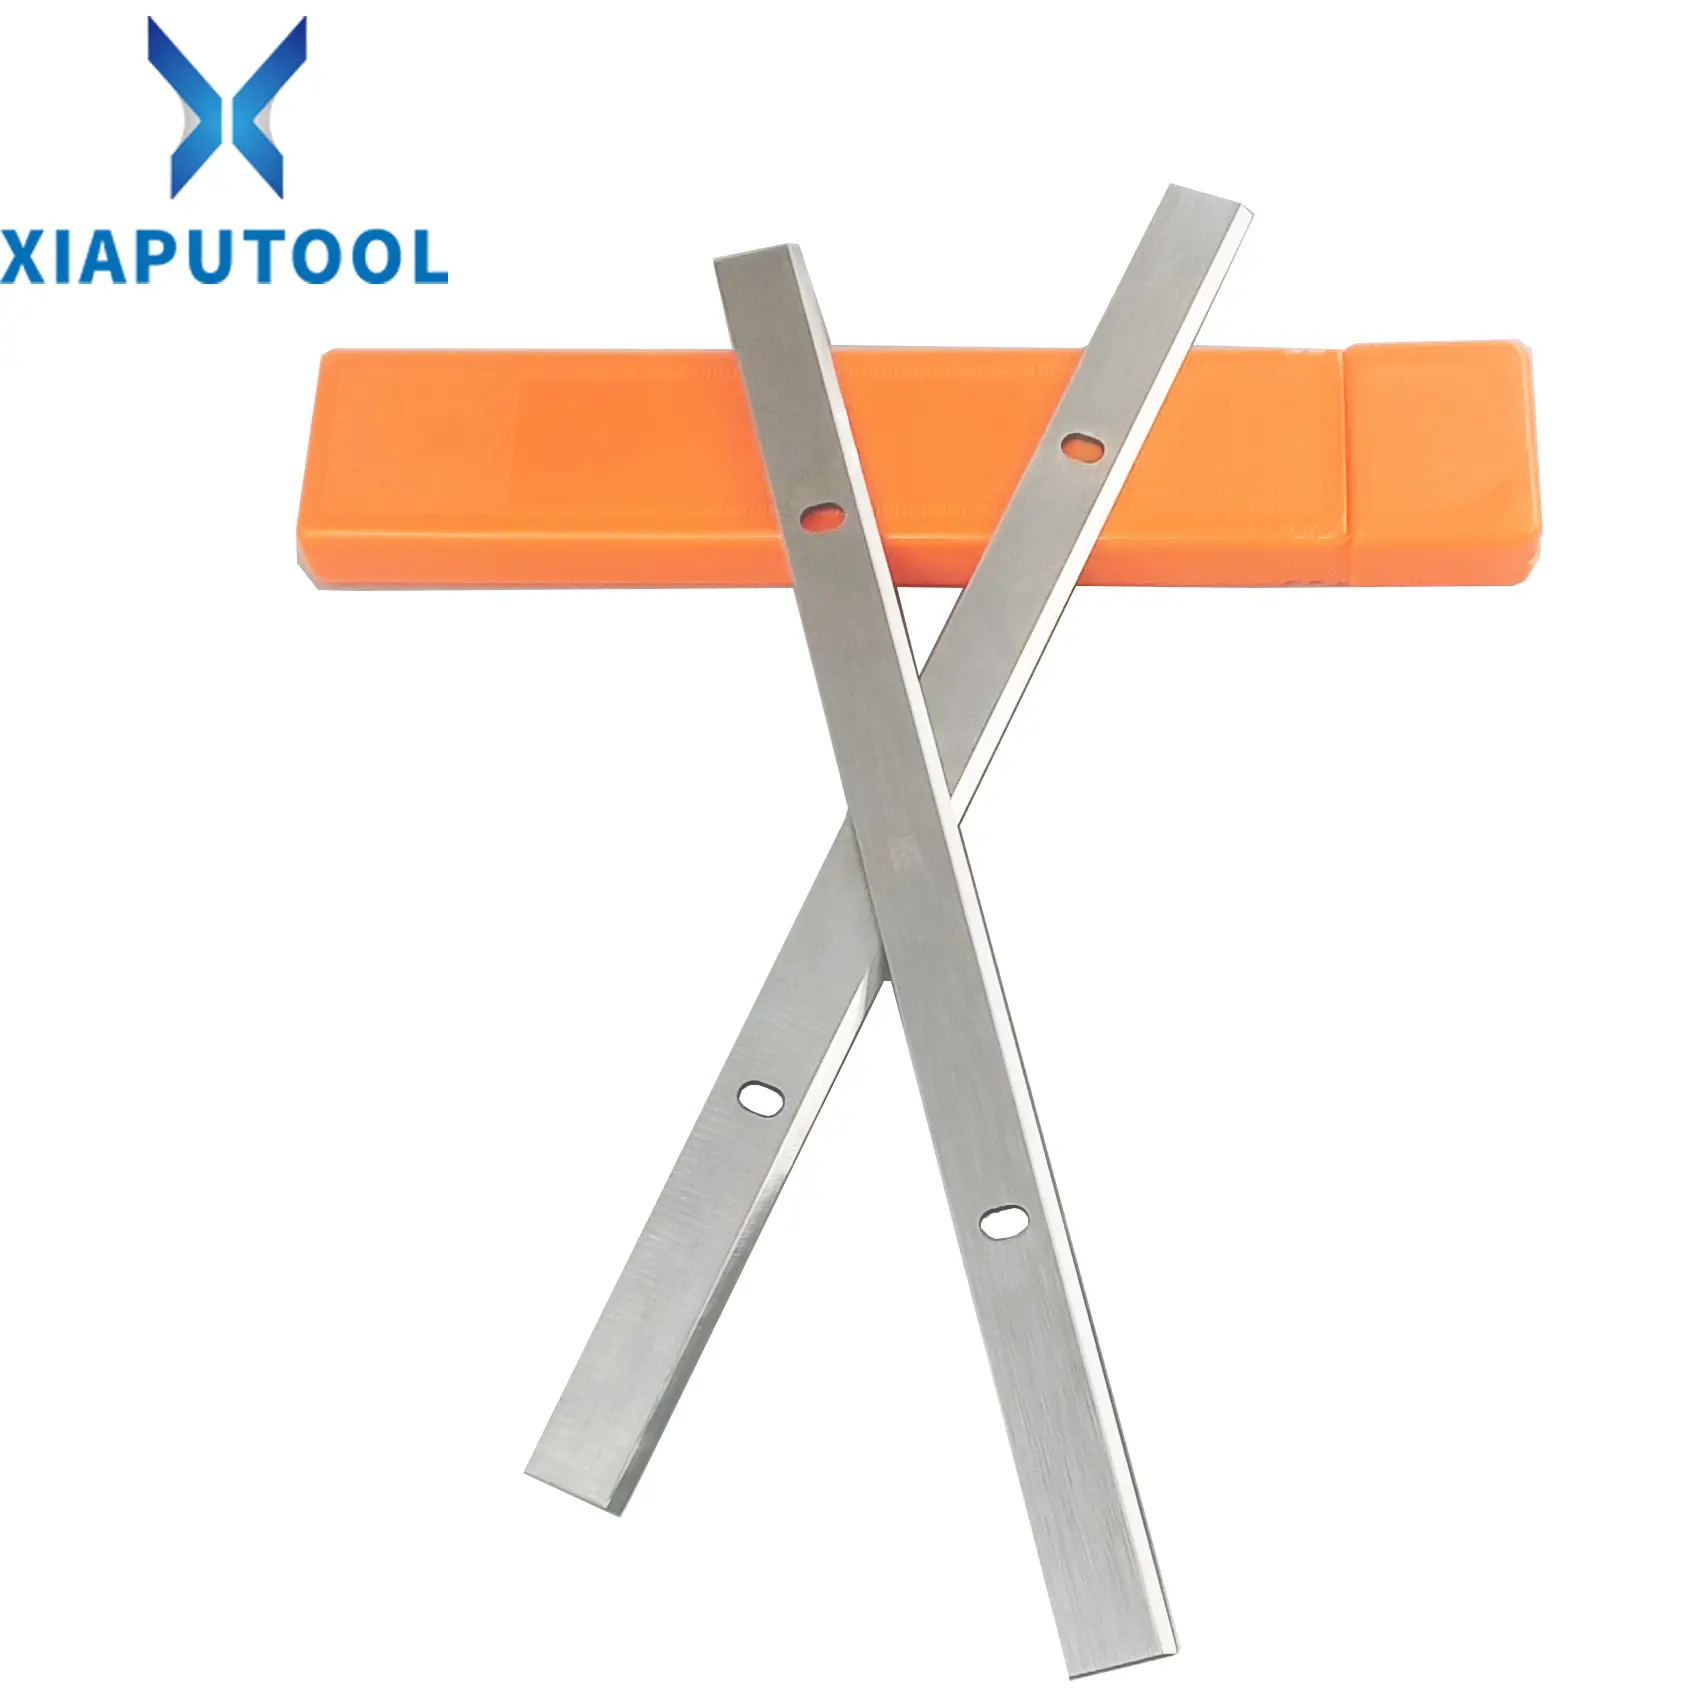 XPTOOL 307mm Industrial Planer Knife Woodworking Tool Wood Planer Machine Woodworking Planer Knife